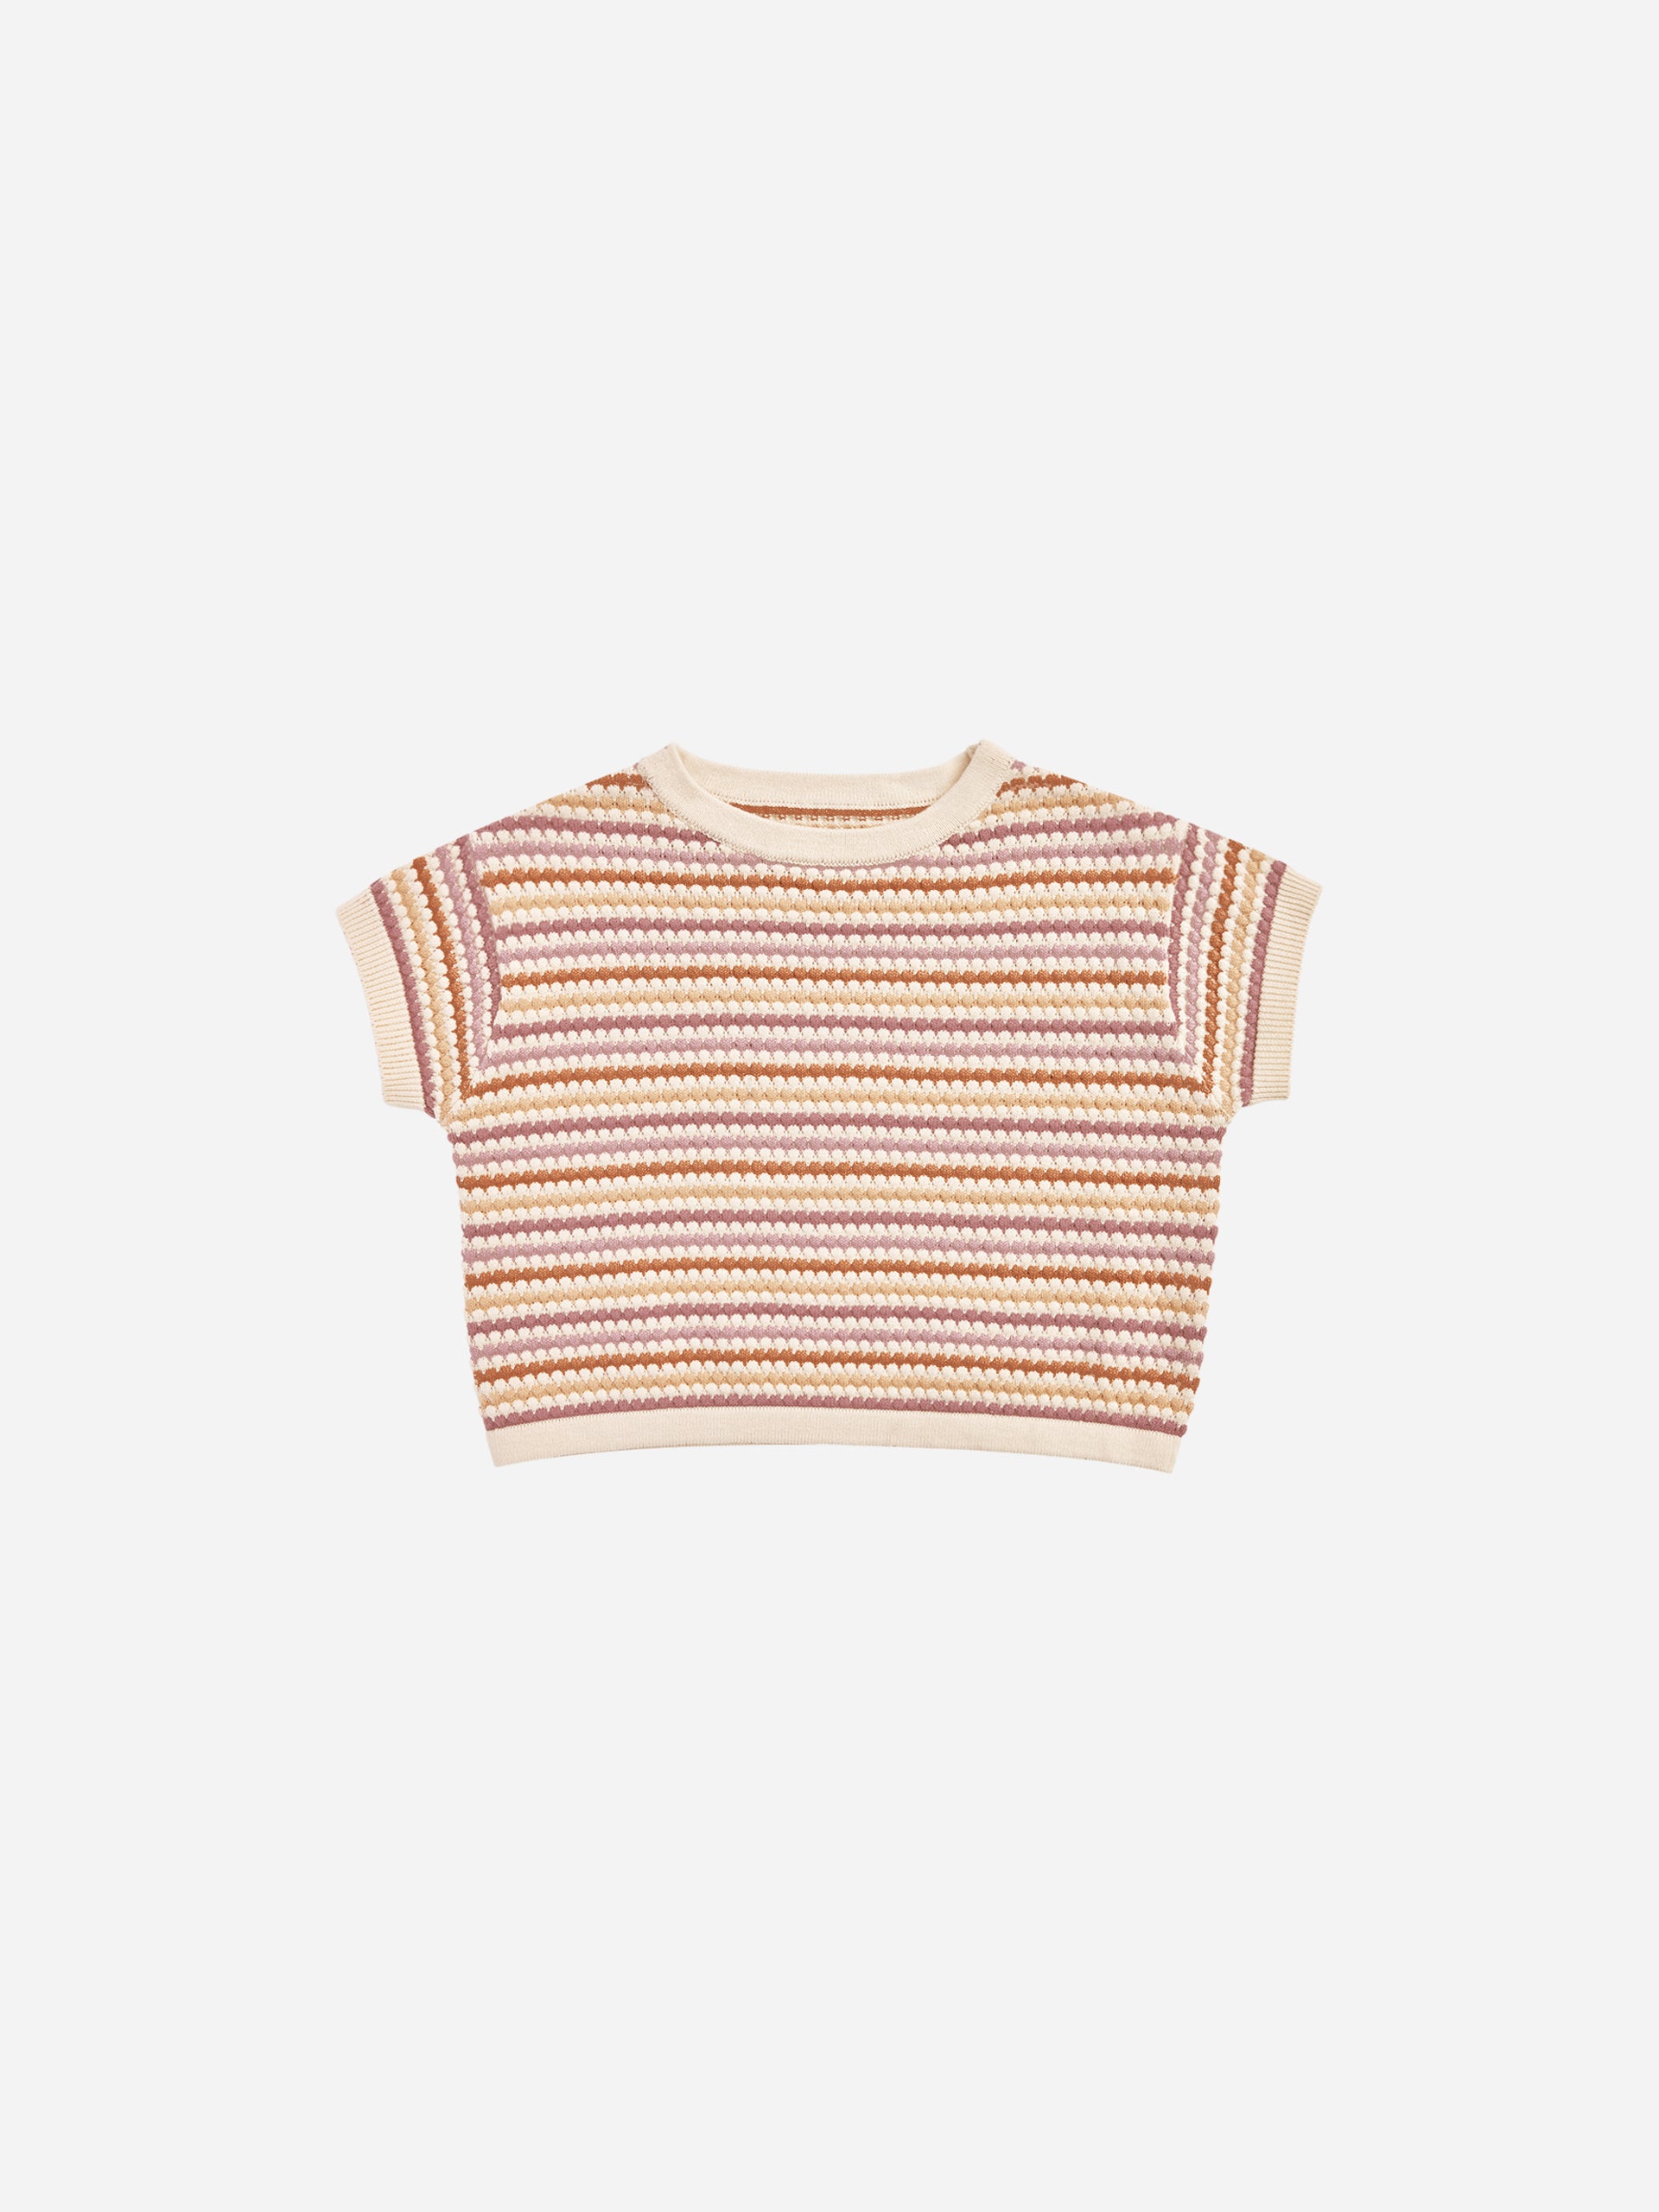 Boxy Crop Knit Tee || Honeycomb Stripe - Rylee + Cru | Kids Clothes | Trendy Baby Clothes | Modern Infant Outfits |